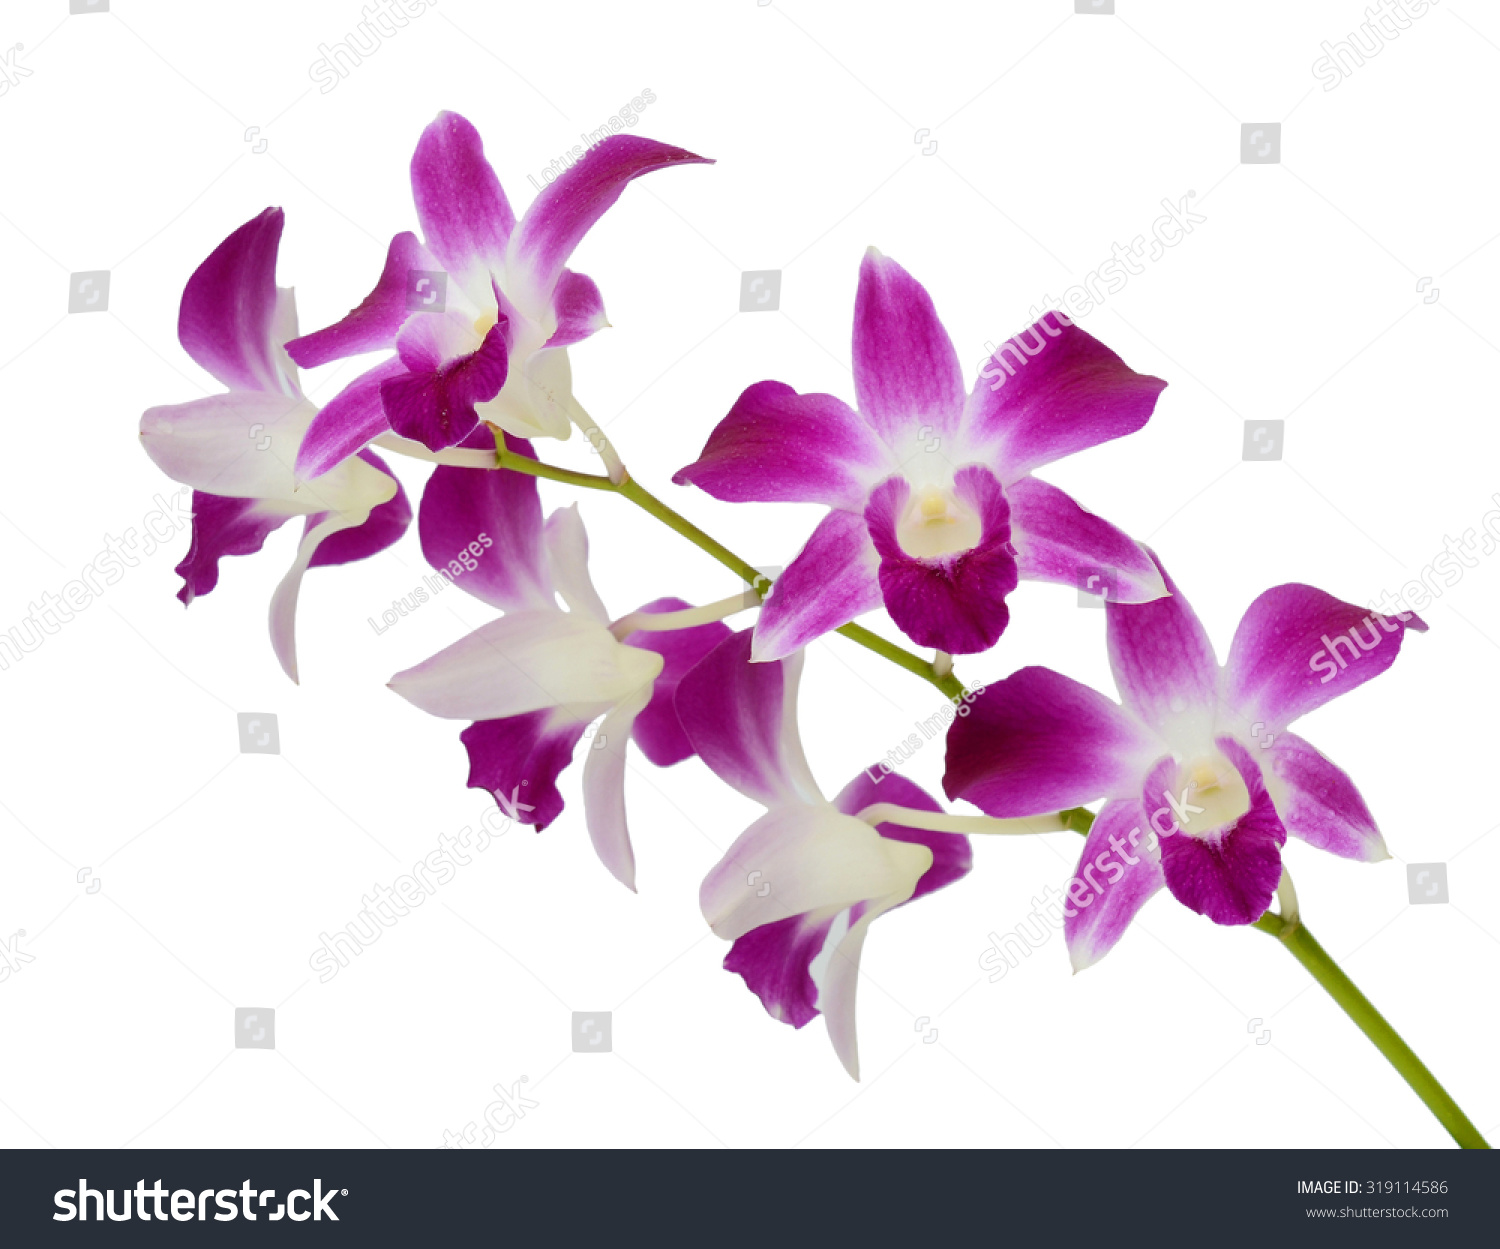 Beautiful Purple Dendrobium Orchids Flowers Isolated Stock Photo Edit Now 319114586